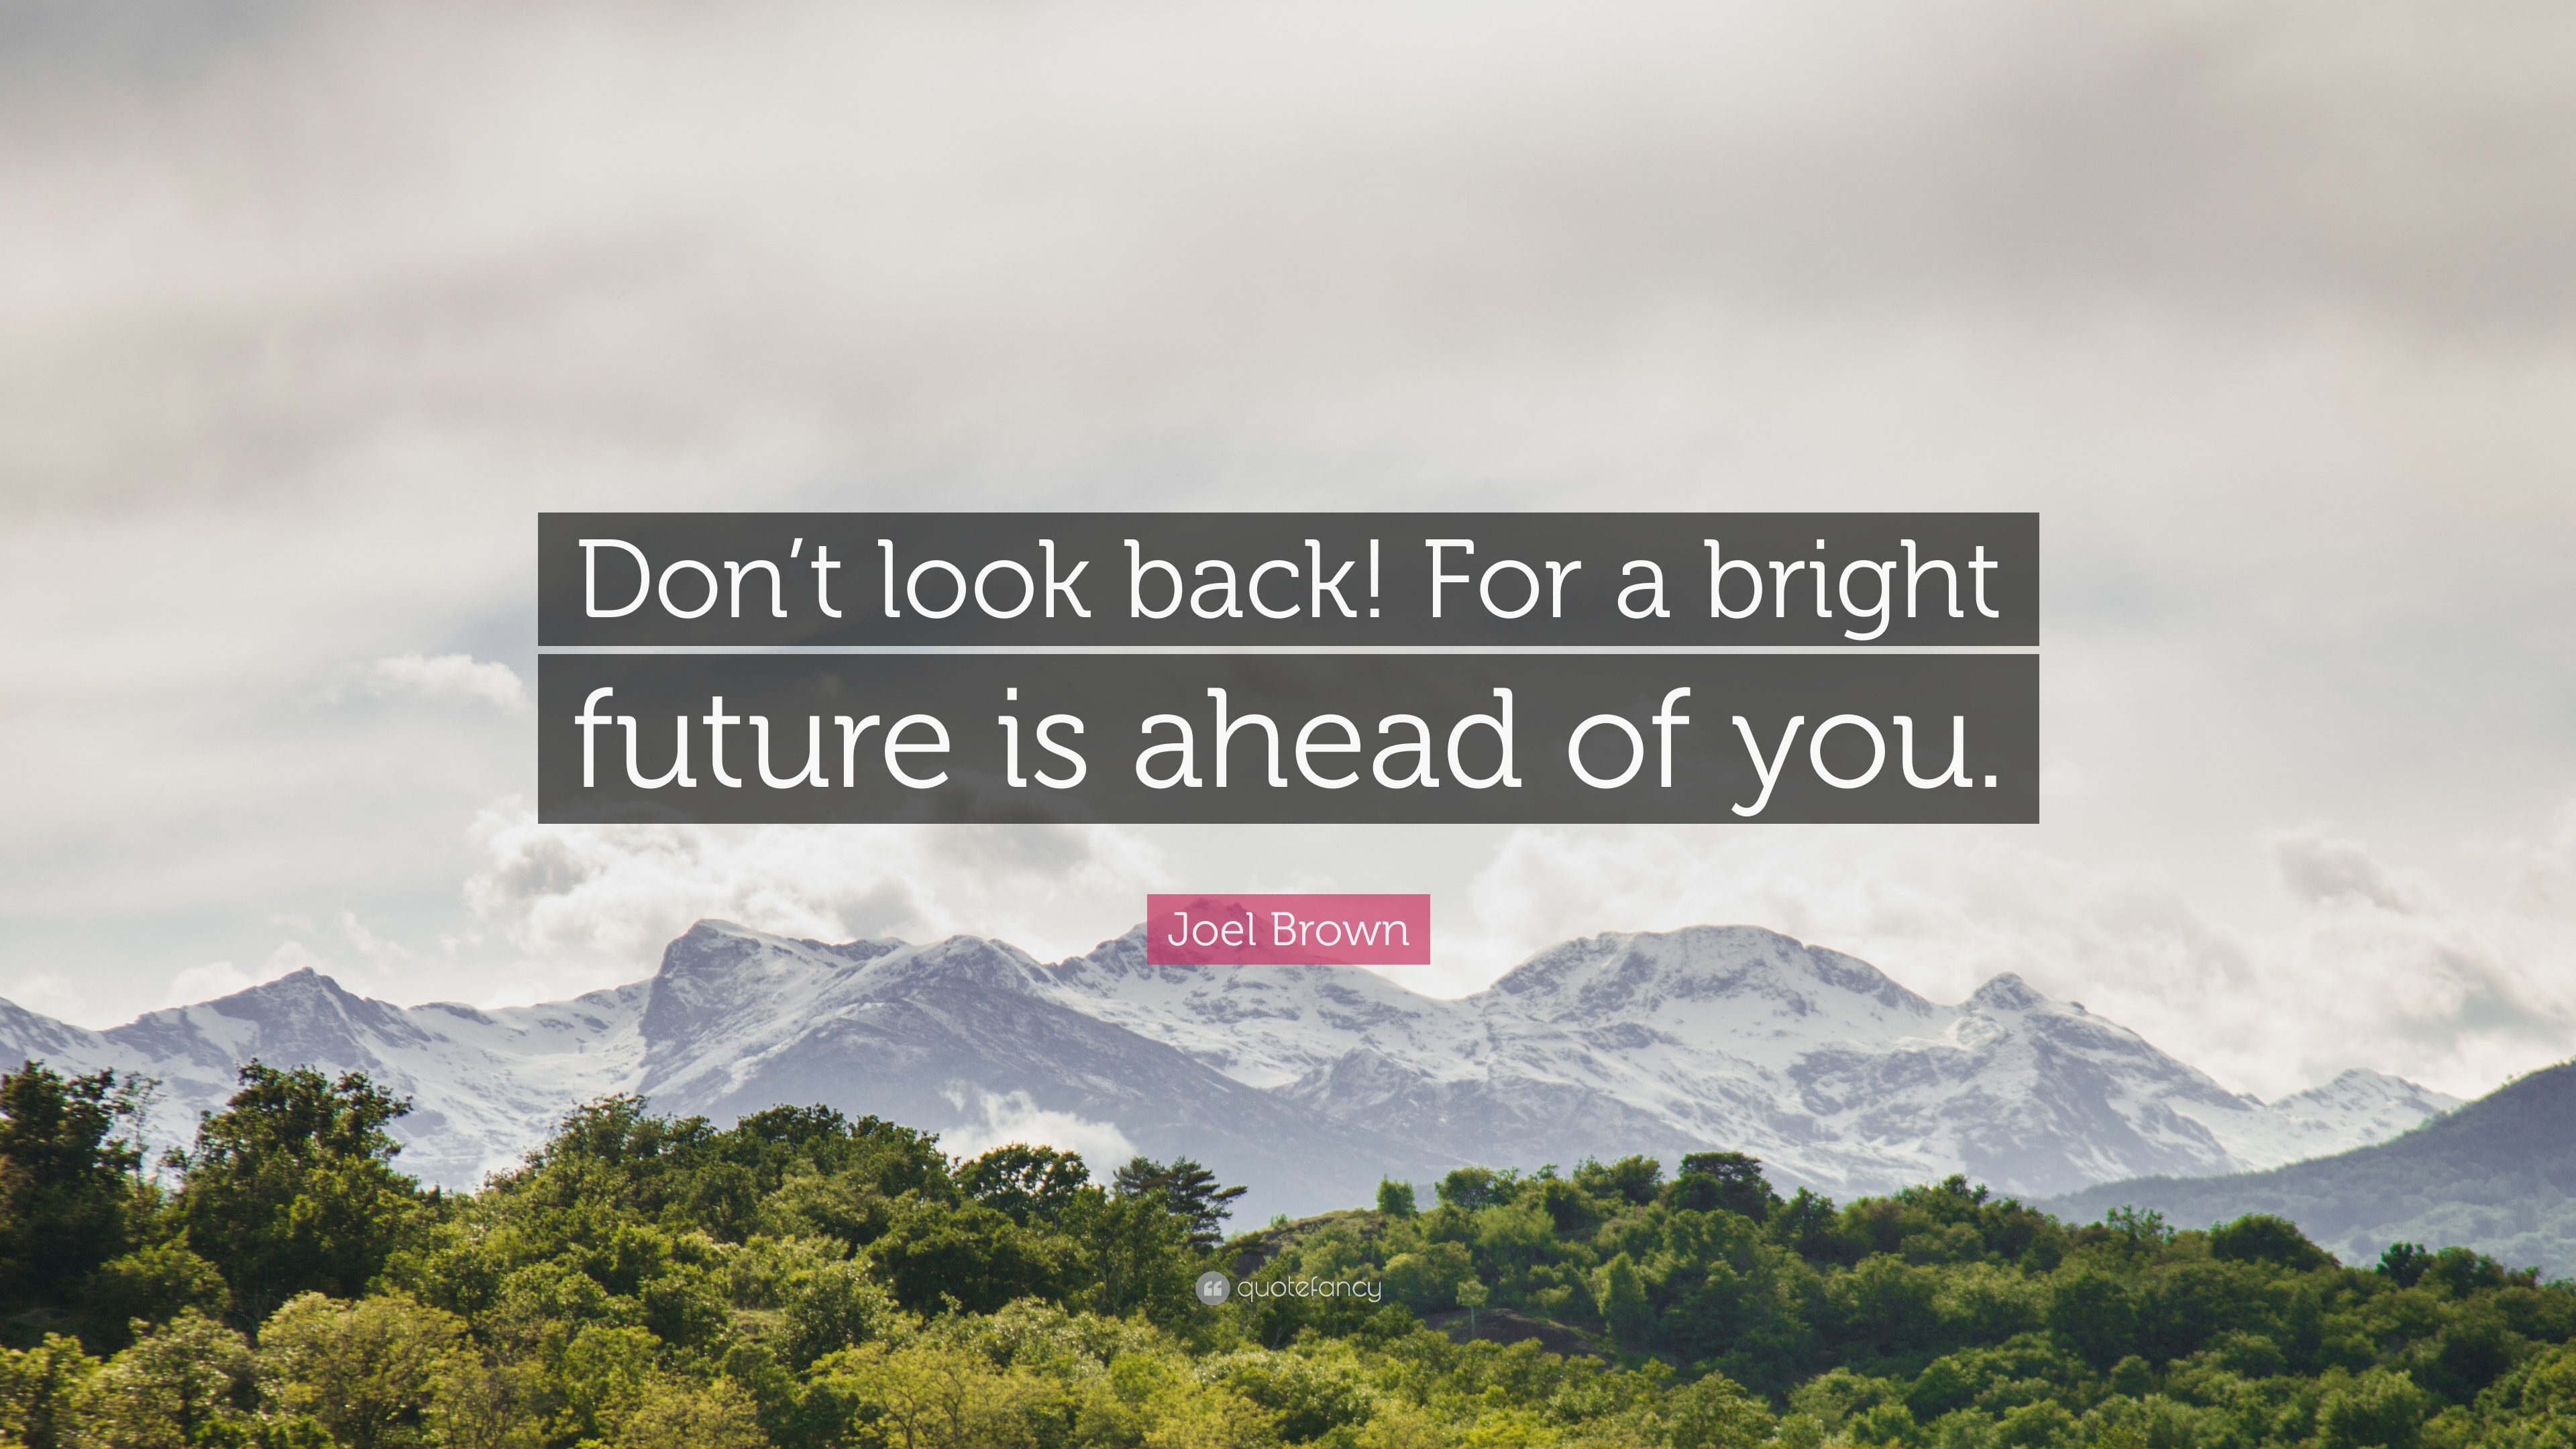 For a bright future is ahead of you. 